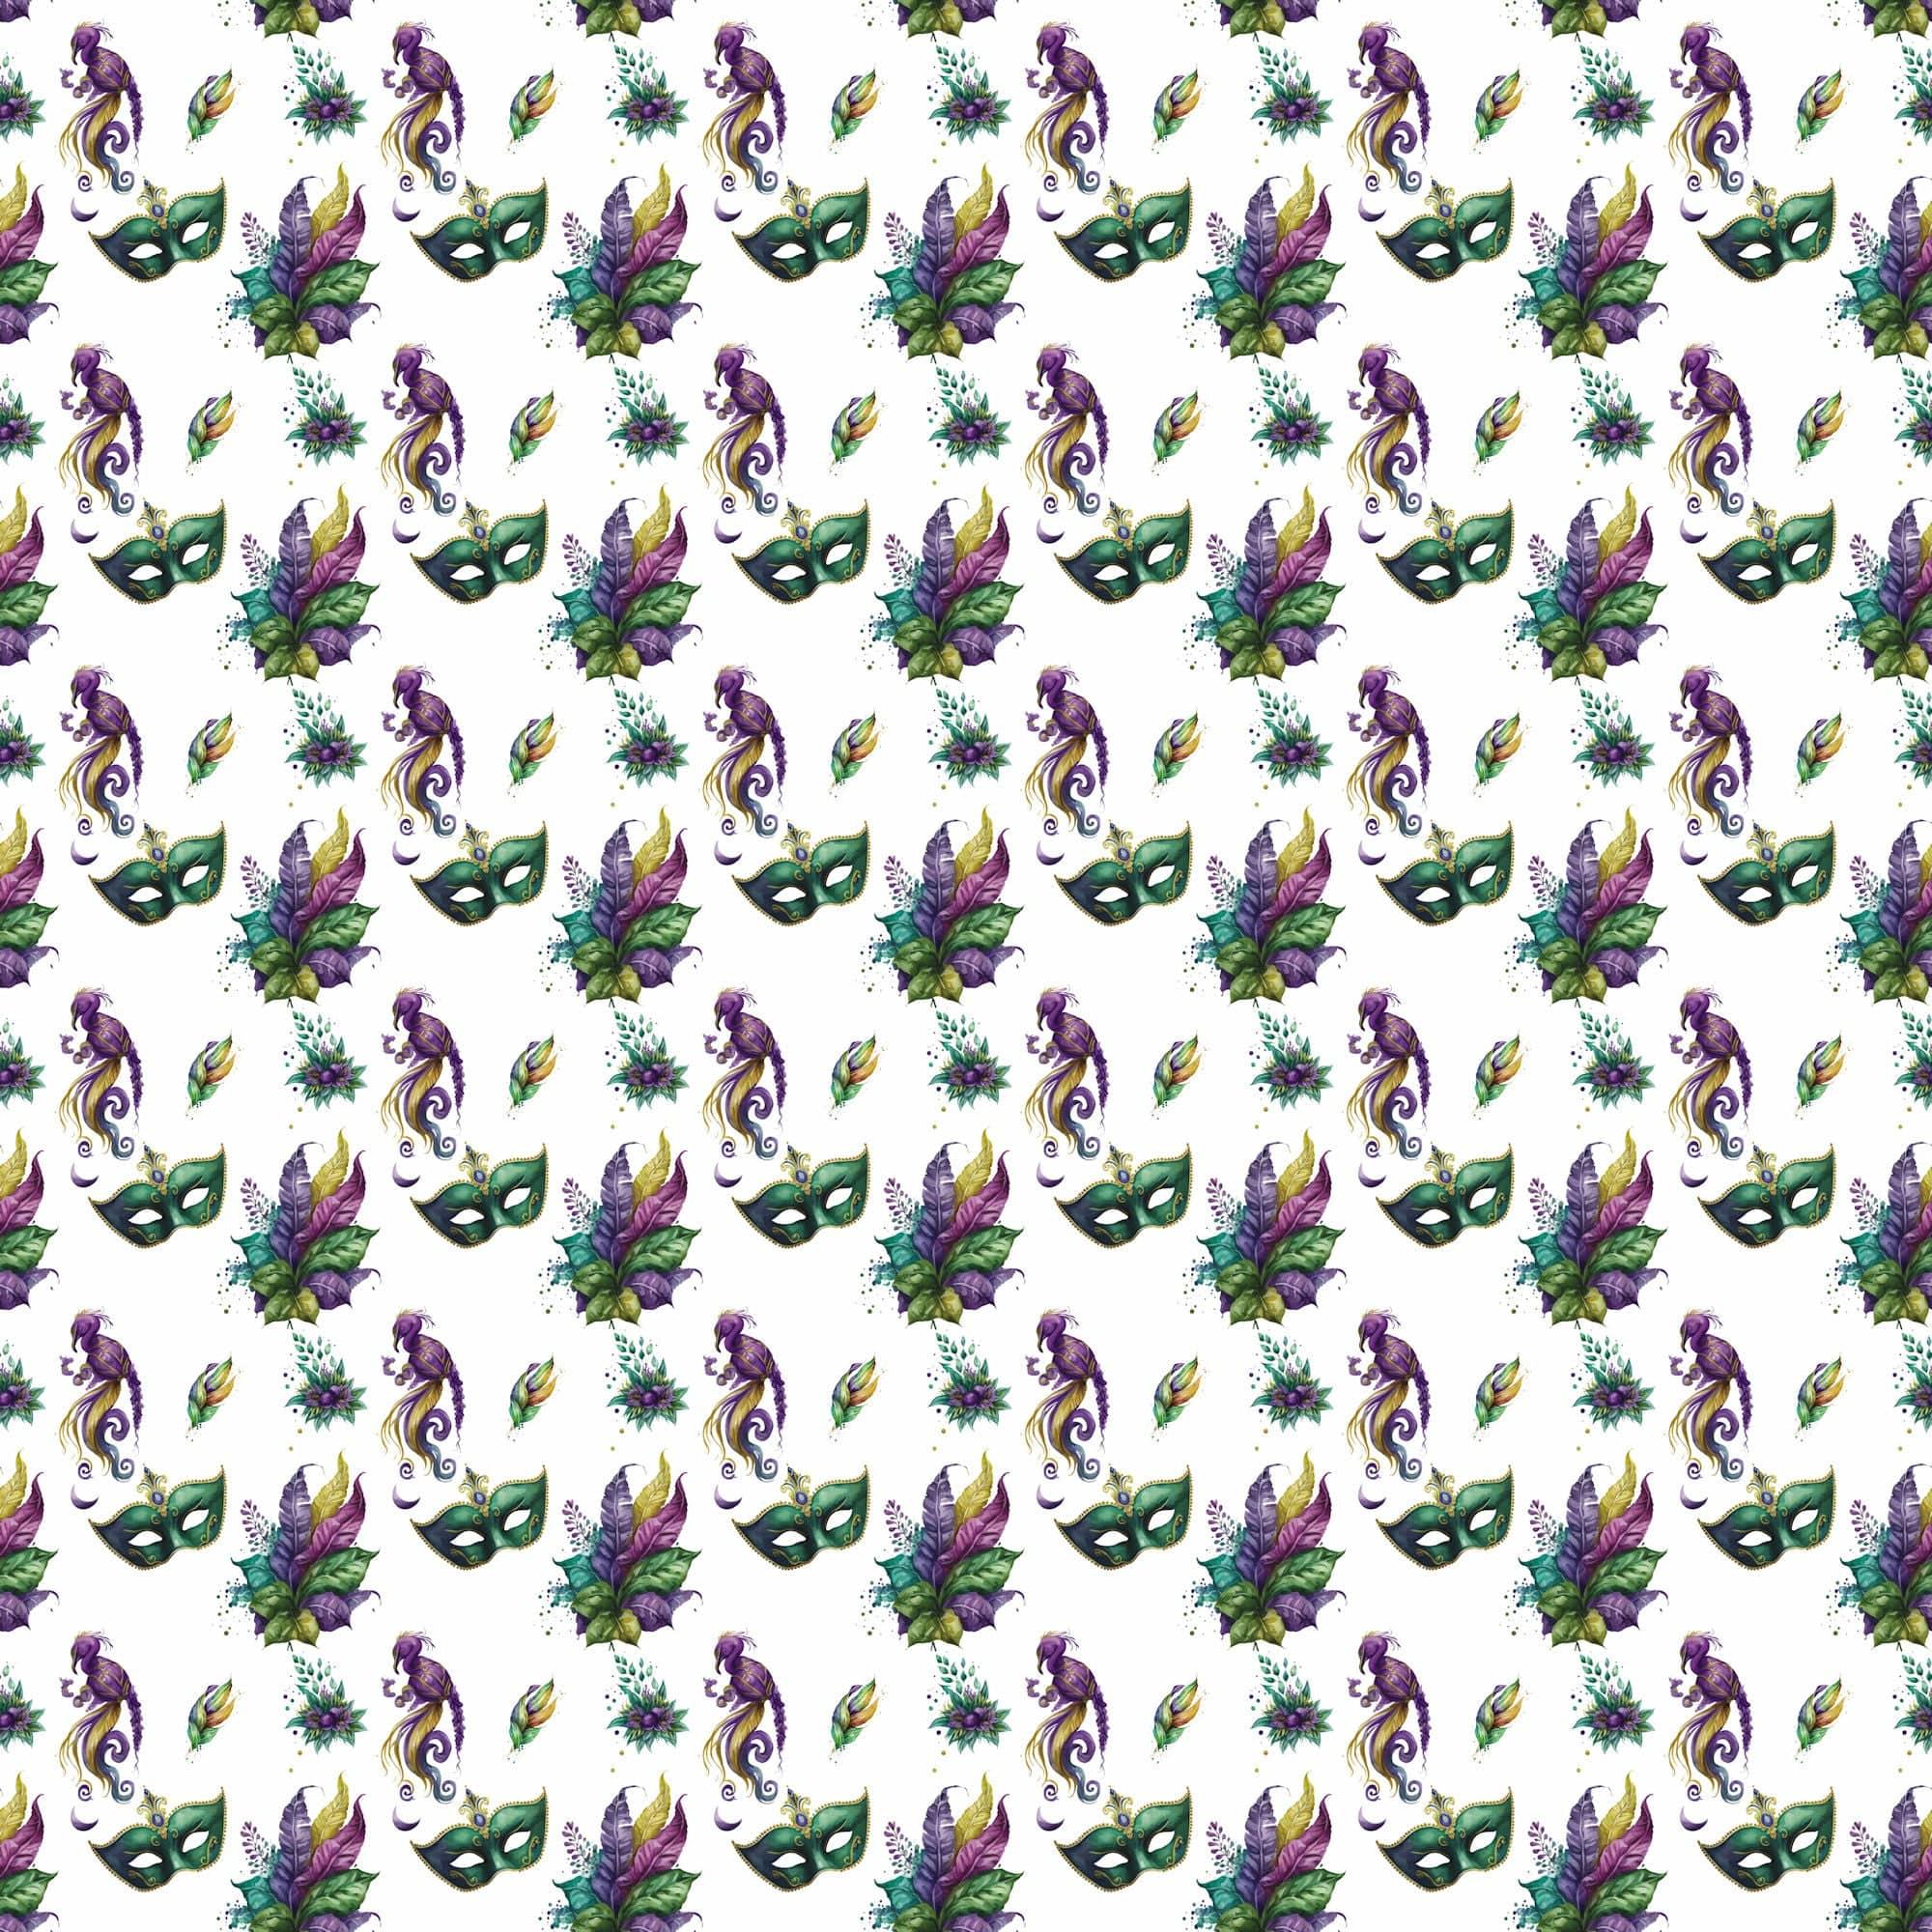 Mardi Gras Collection King Cake 12 x 12 Double-Sided Scrapbook Paper by SSC Designs - Scrapbook Supply Companies